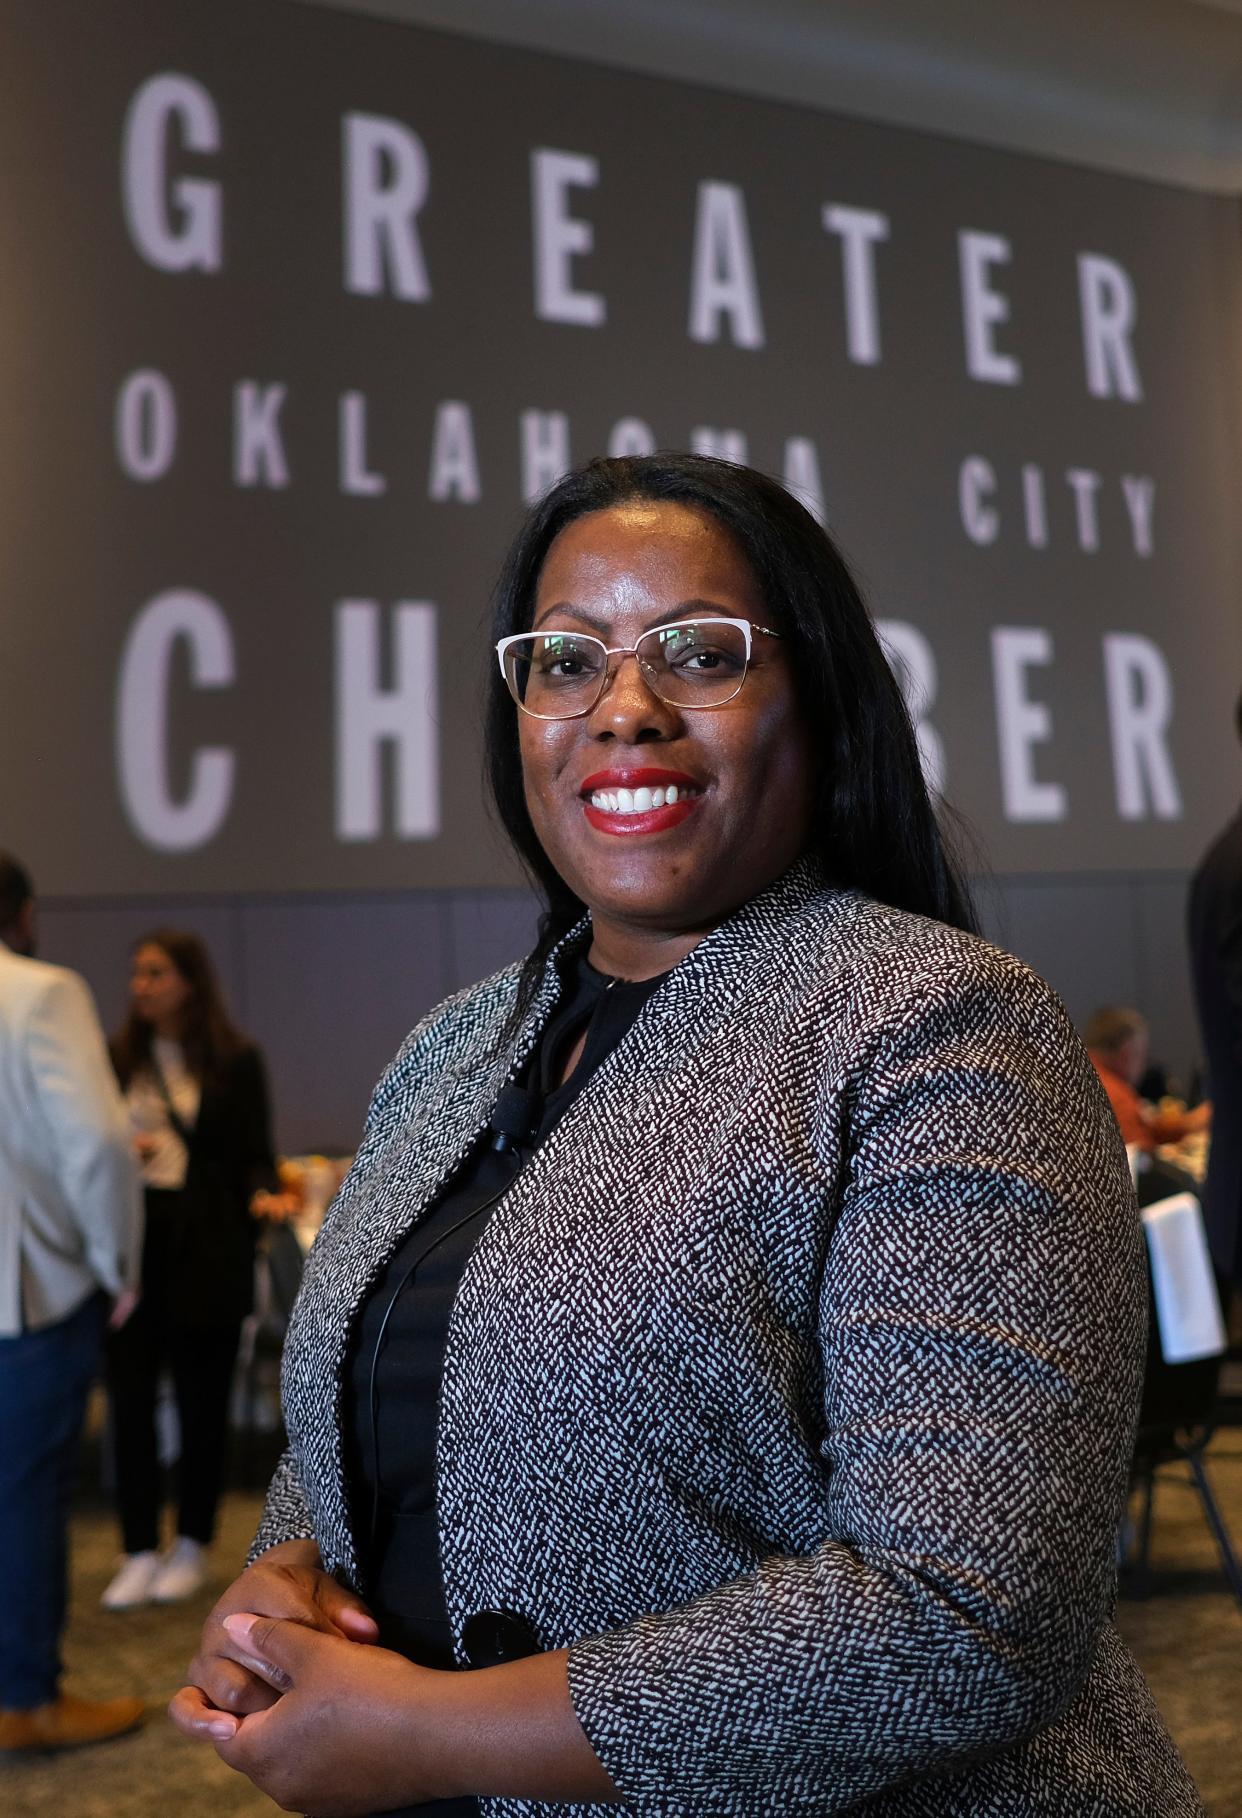 Keynote speaker Dana M. Peterson on Wednesday at the Greater Oklahoma City Chamber State of the Economy presentation and luncheon at the National Cowboy & Western Heritage Museum.